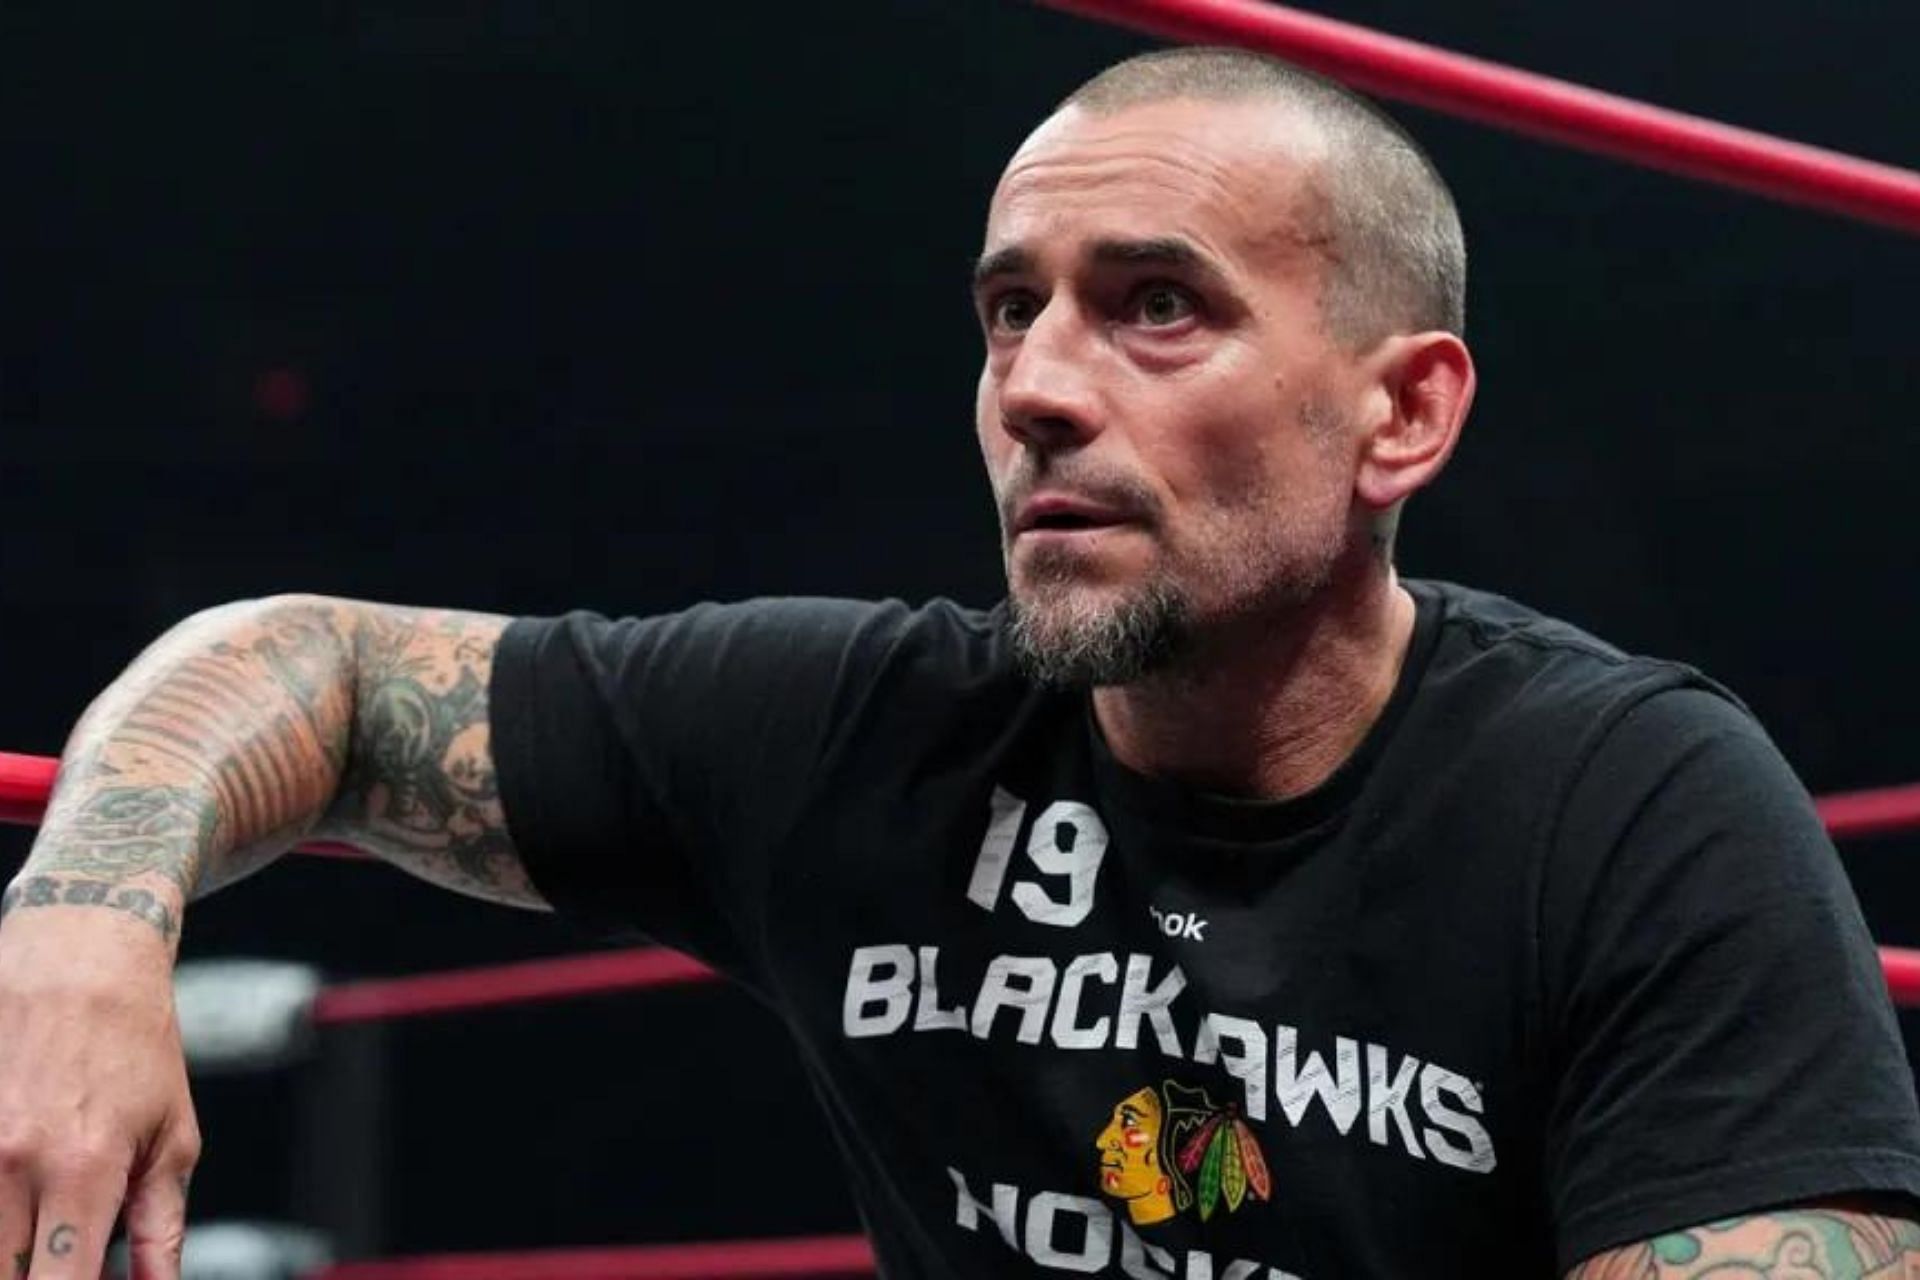 A WWE veteran thinks Punk knows what he